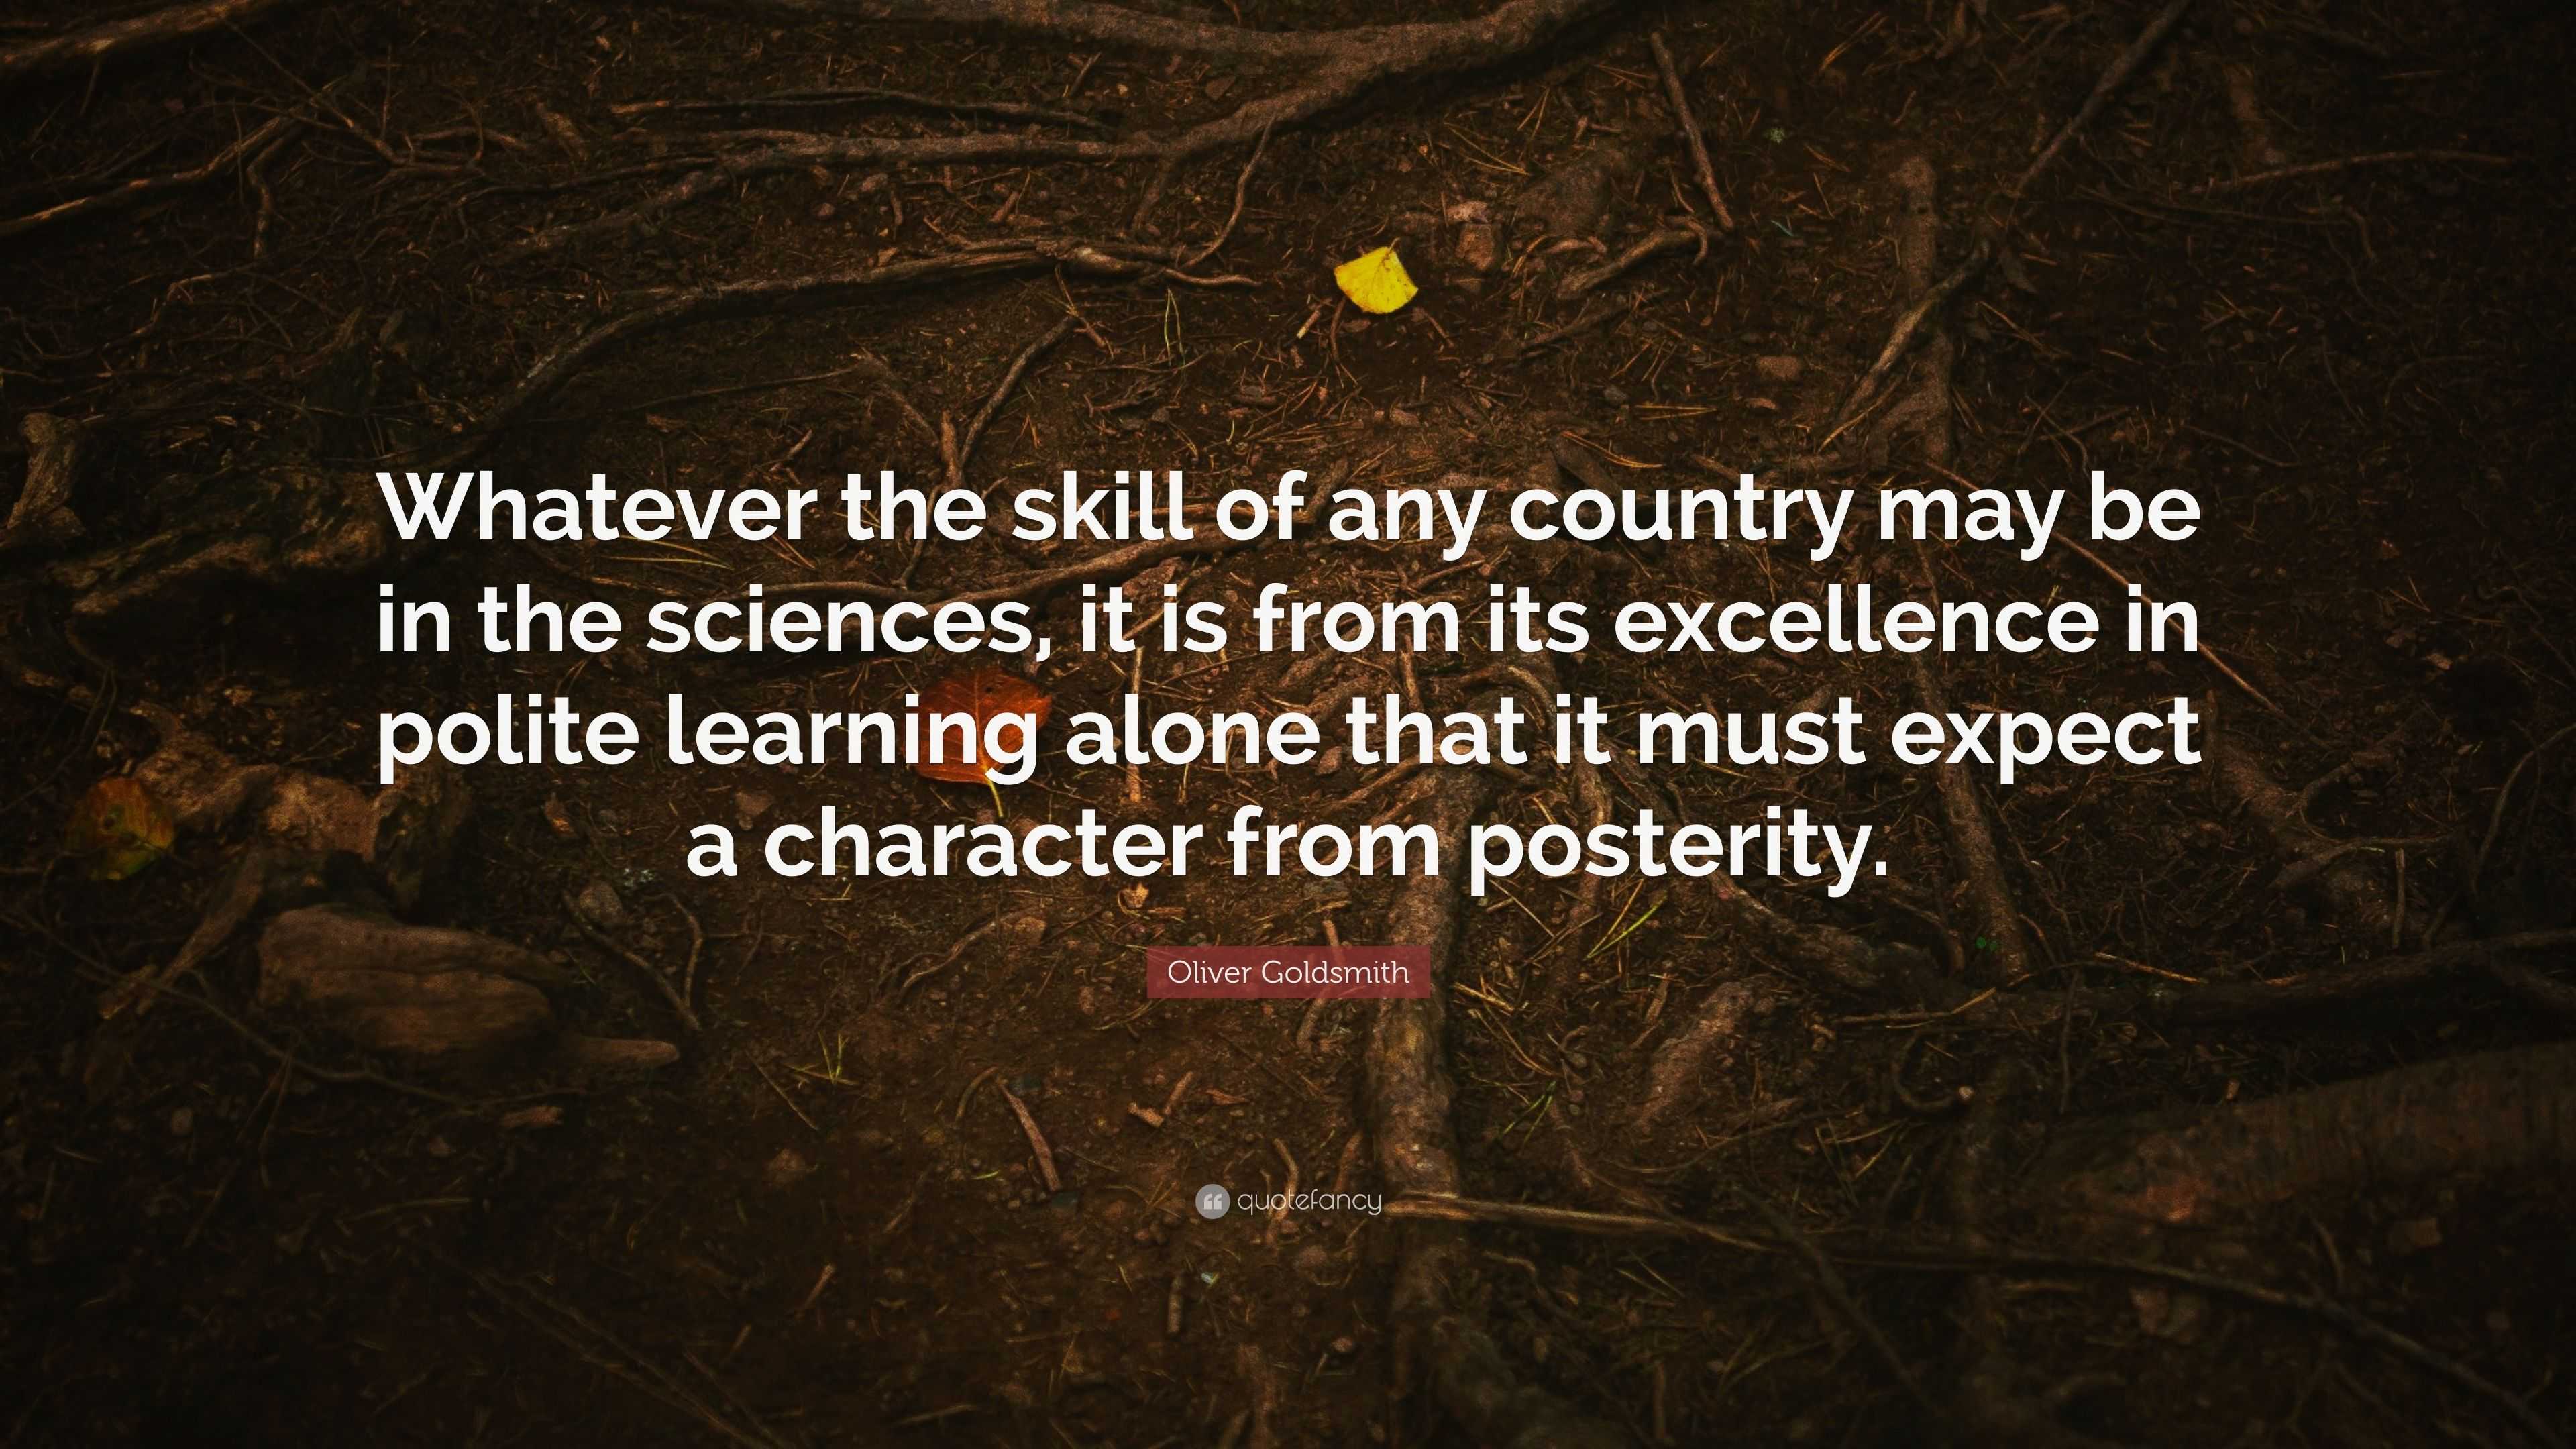 Oliver Goldsmith Quote: “Whatever the skill of any country may be